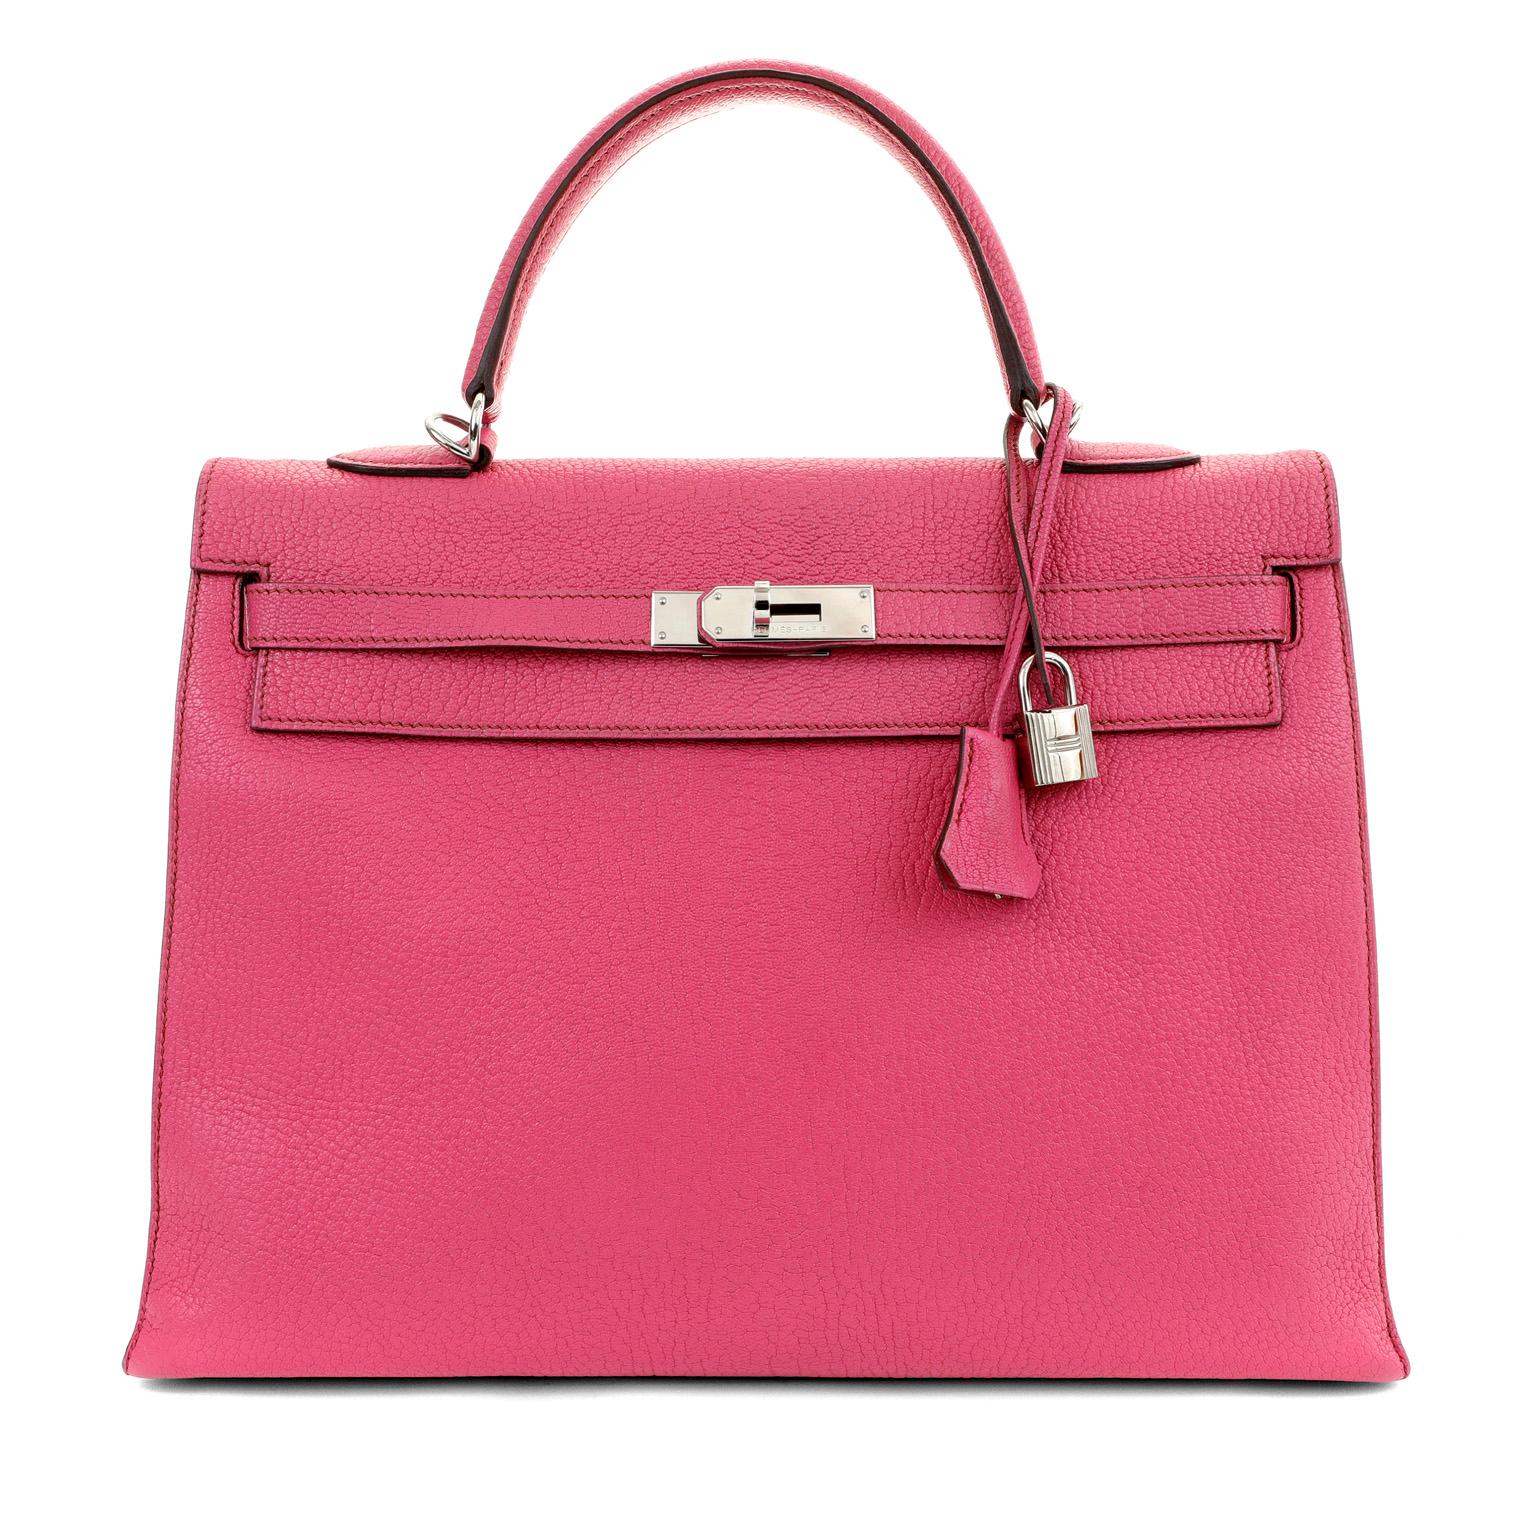 This authentic Hermès 35 cm Shocking Pink Chevre Kelly is in excellent plus condition. Coveted worldwide, the demure and classic Kelly bag is highly desirable in this eye-catching pop of pink. 

Intense pink chevre leather is extremely durable and